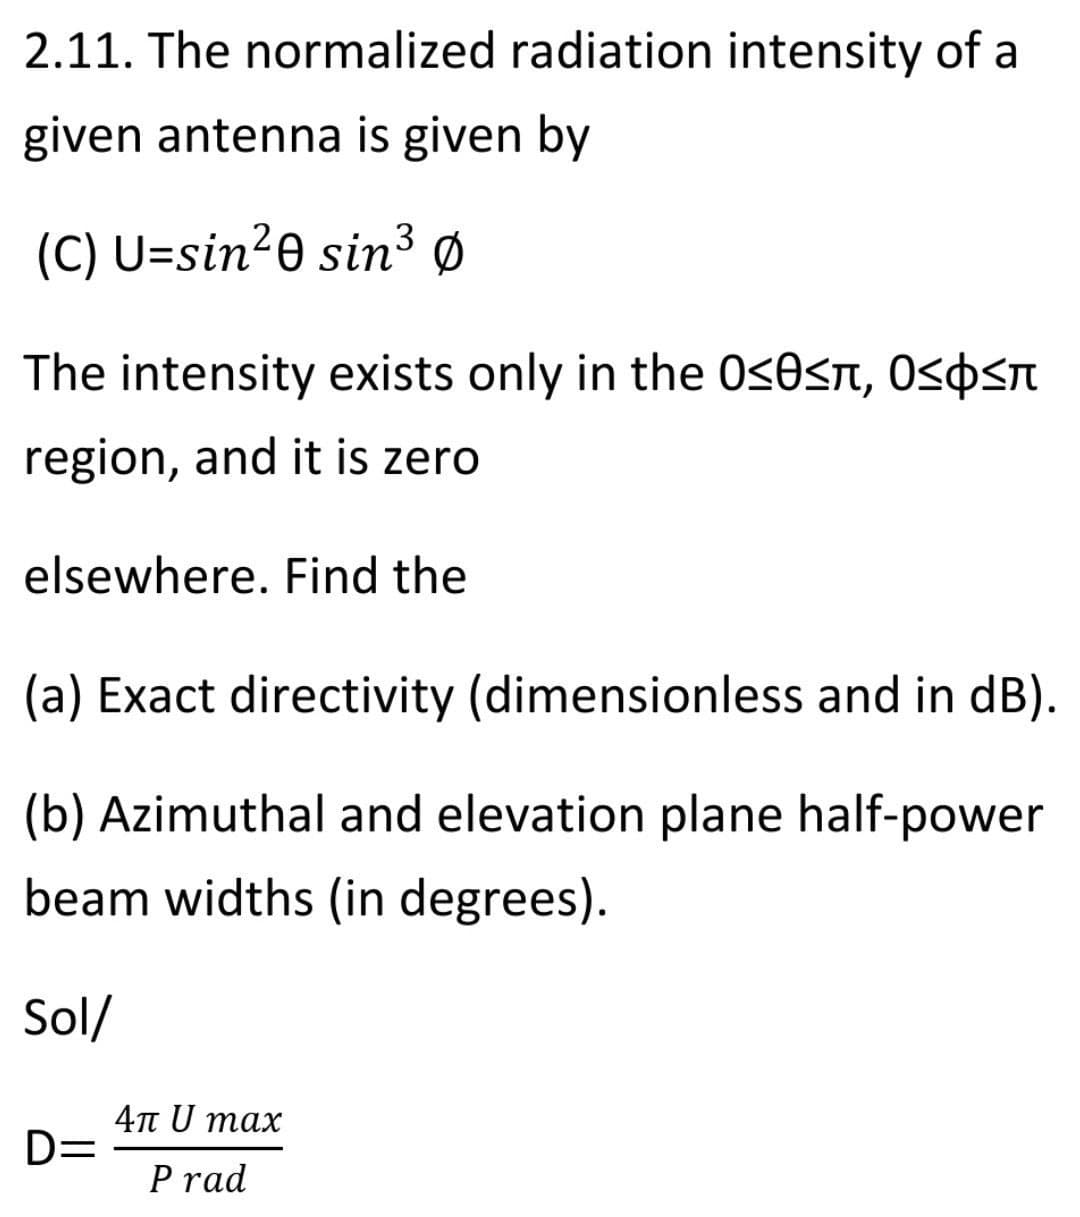 2.11. The normalized radiation intensity of a
given antenna is given by
3
(C) U=sin²0 sin³ Ø
The intensity exists only in the 0<0<n, Ospsn
region, and it is zero
elsewhere. Find the
(a) Exact directivity (dimensionless and in dB).
(b) Azimuthal and elevation plane half-power
beam widths (in degrees).
Sol/
4n U max
D=
P rad
